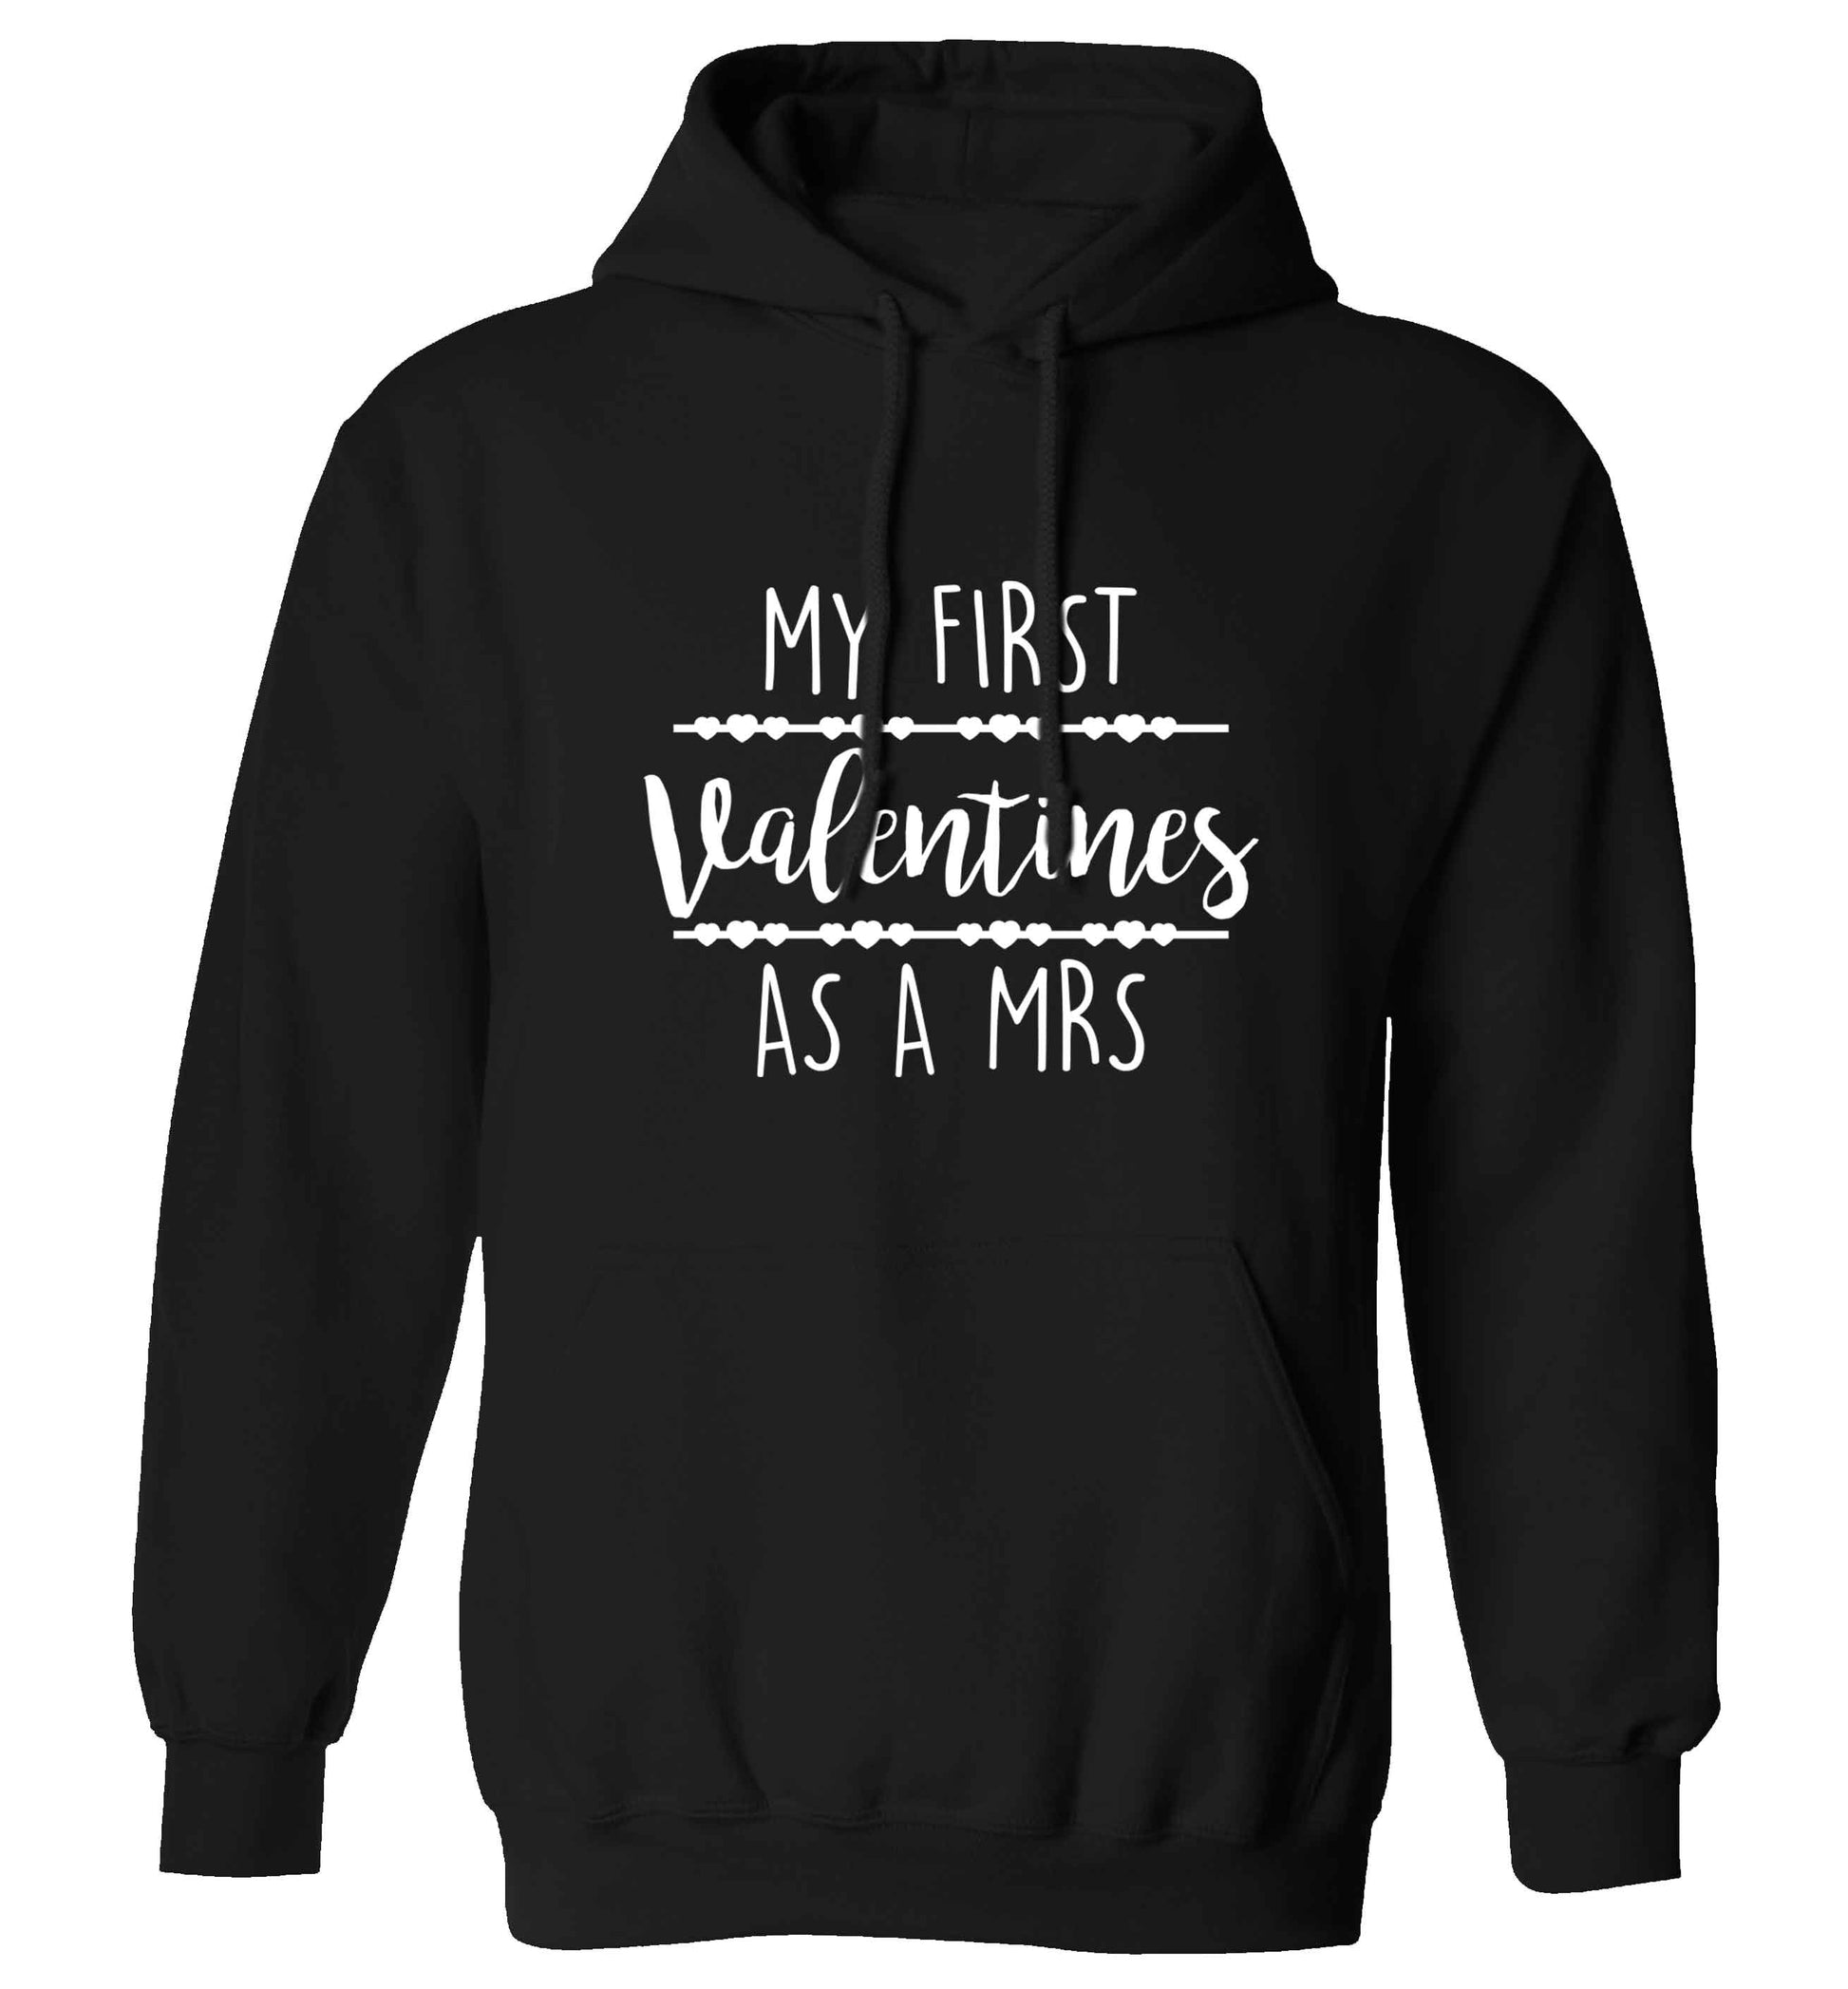 My first valentines as a Mrs adults unisex black hoodie 2XL